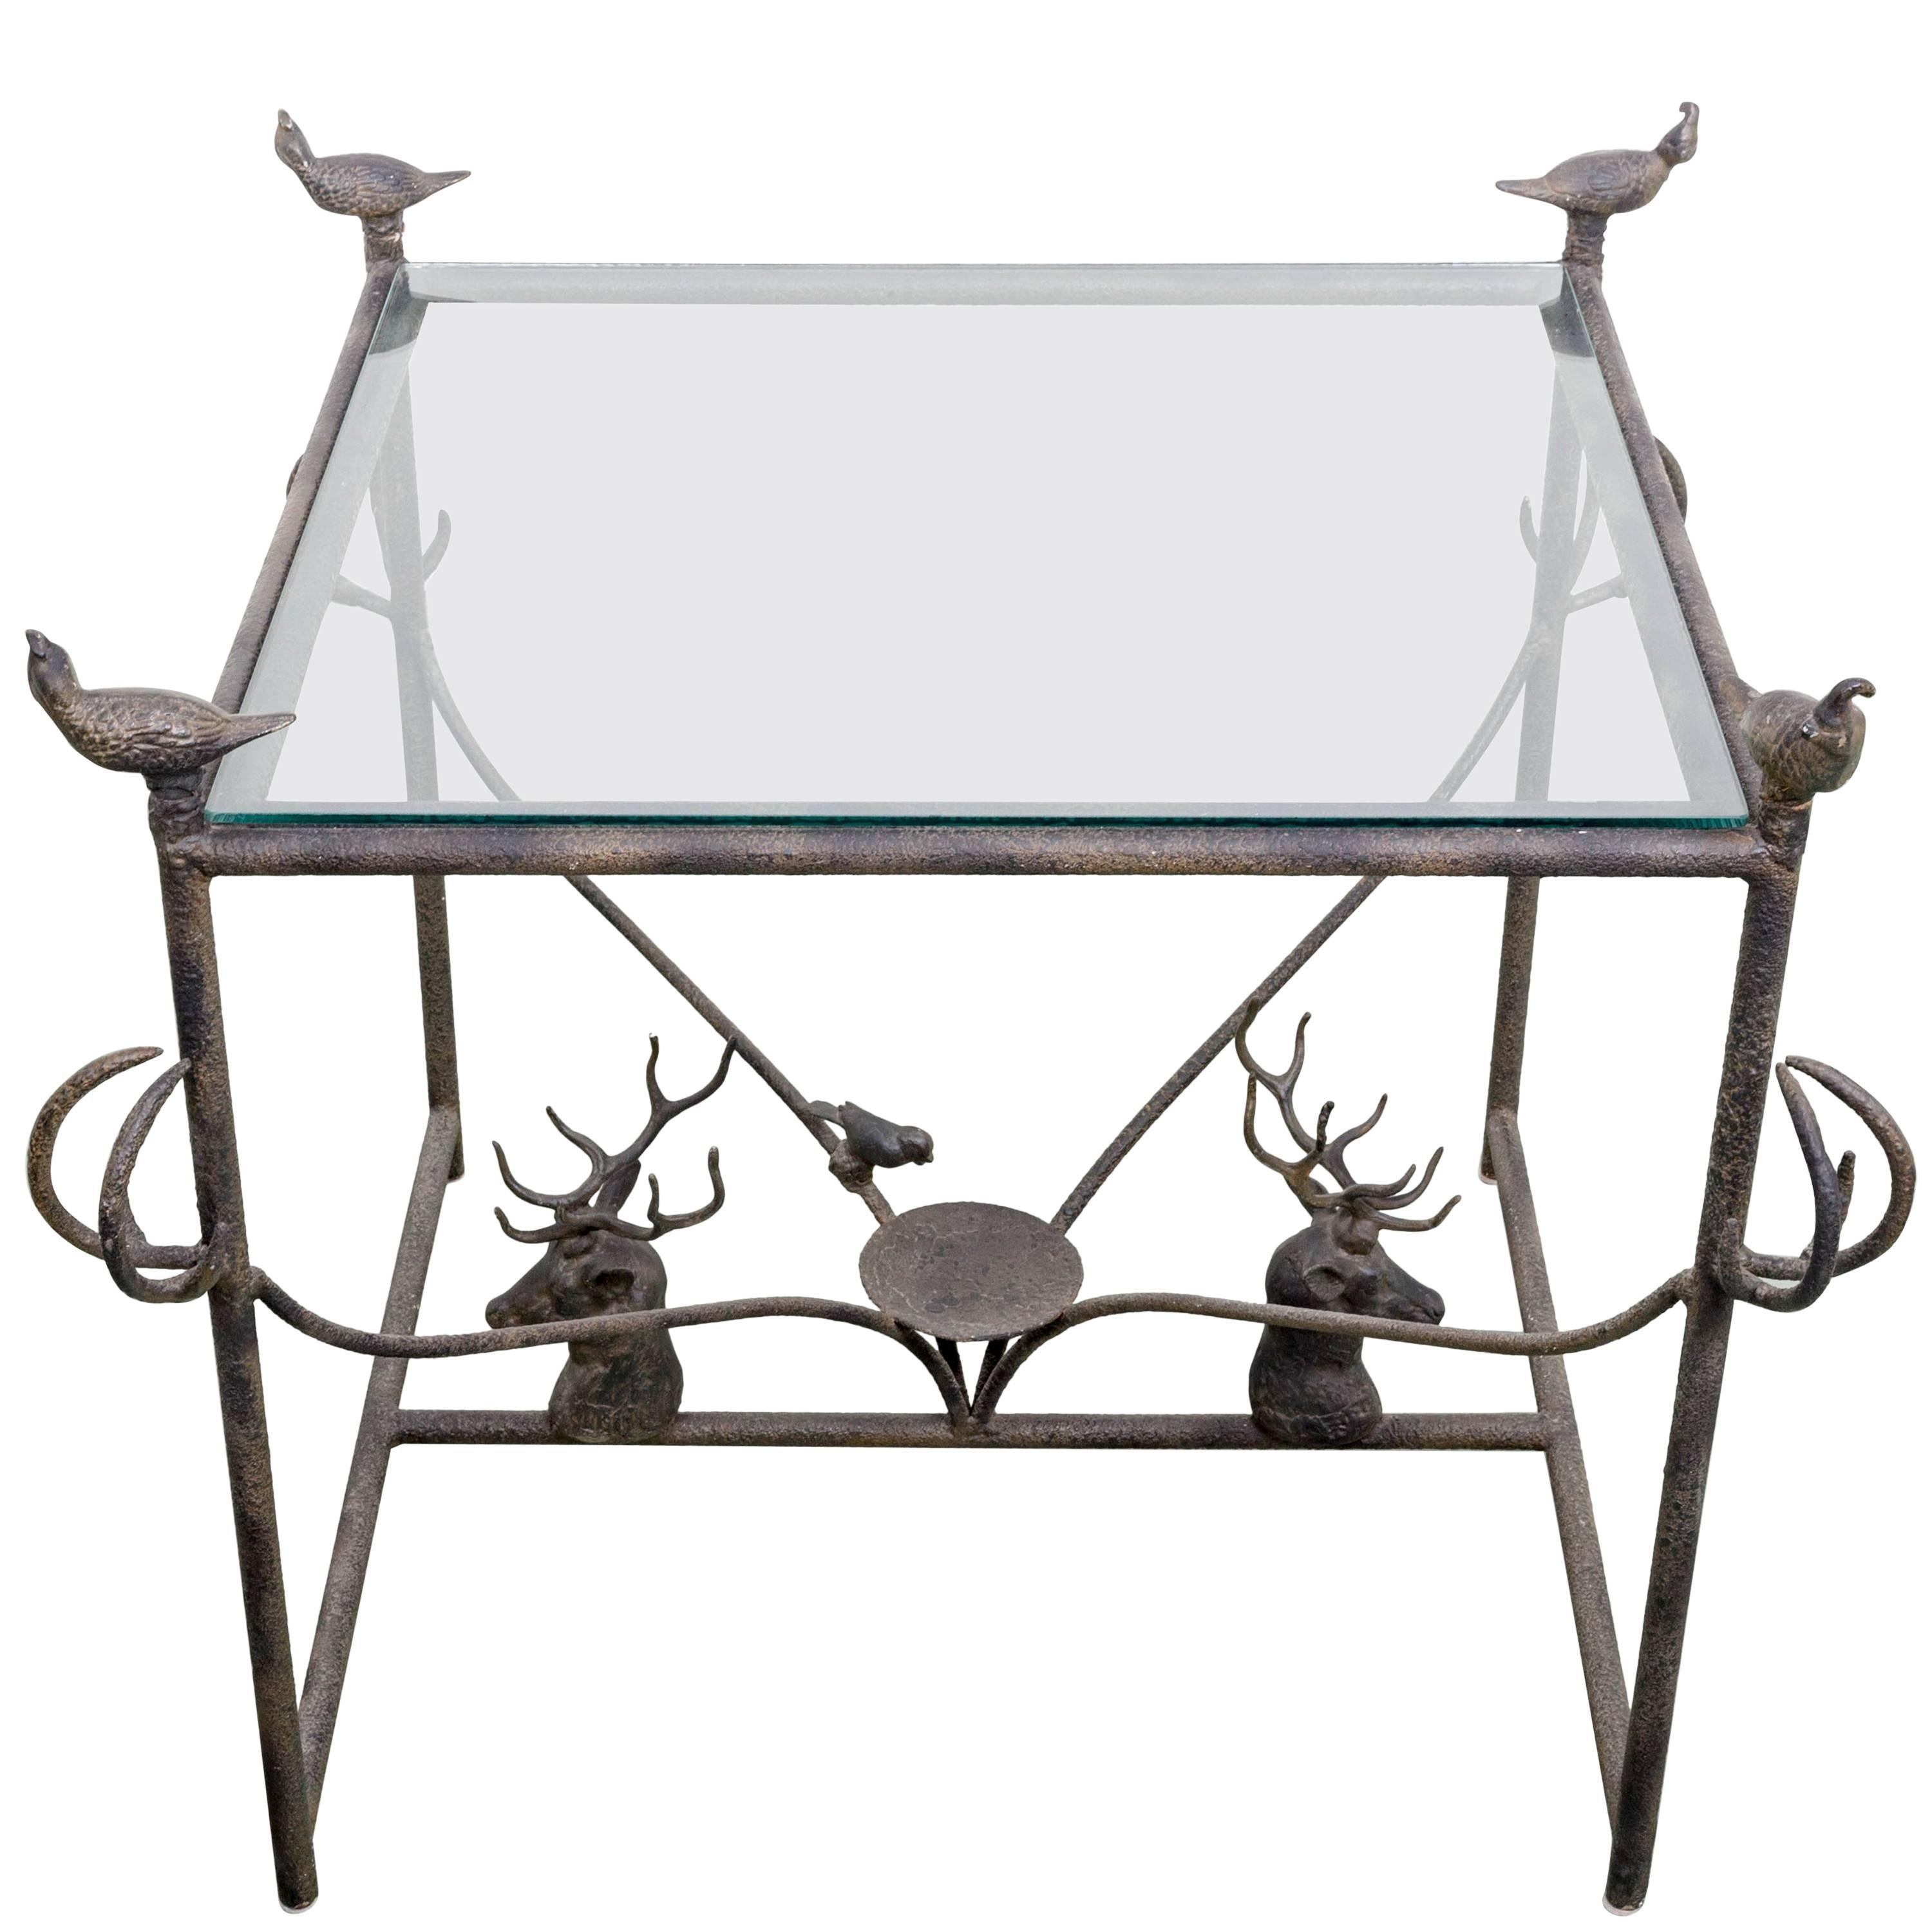 Decorative Metal Side Table with Quail and Stag Head Motifs